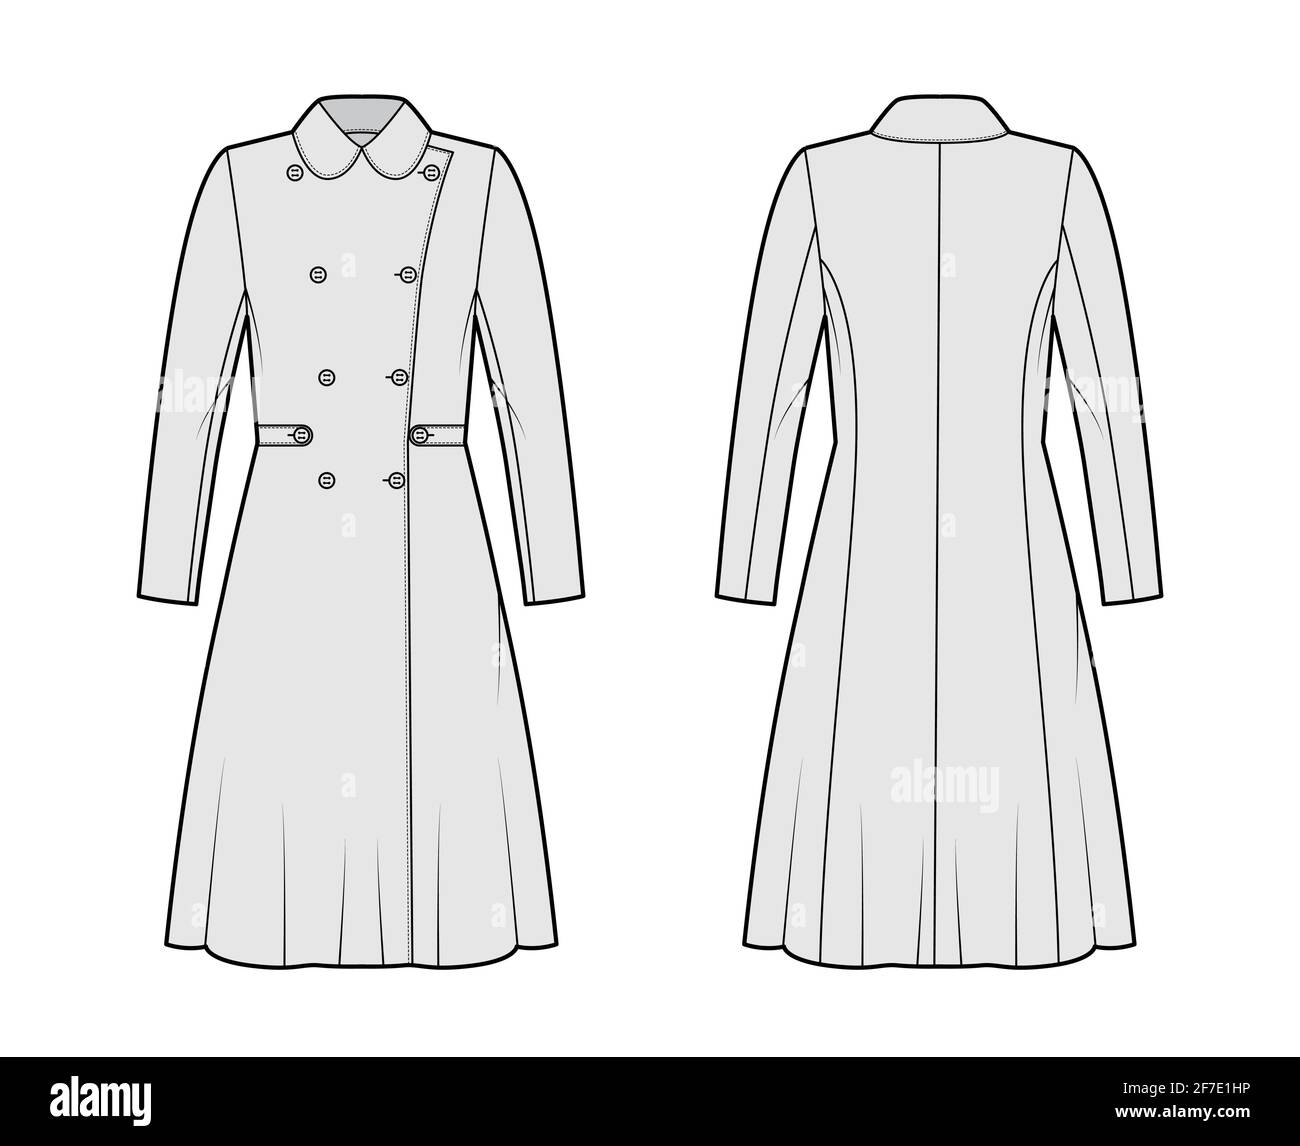 Skating coat technical fashion illustration with tabs, double breasted, long sleeves, round collar, knee length, A-line silhouette. Flat template front, back, grey color style. Women, men, CAD mockup Stock Vector